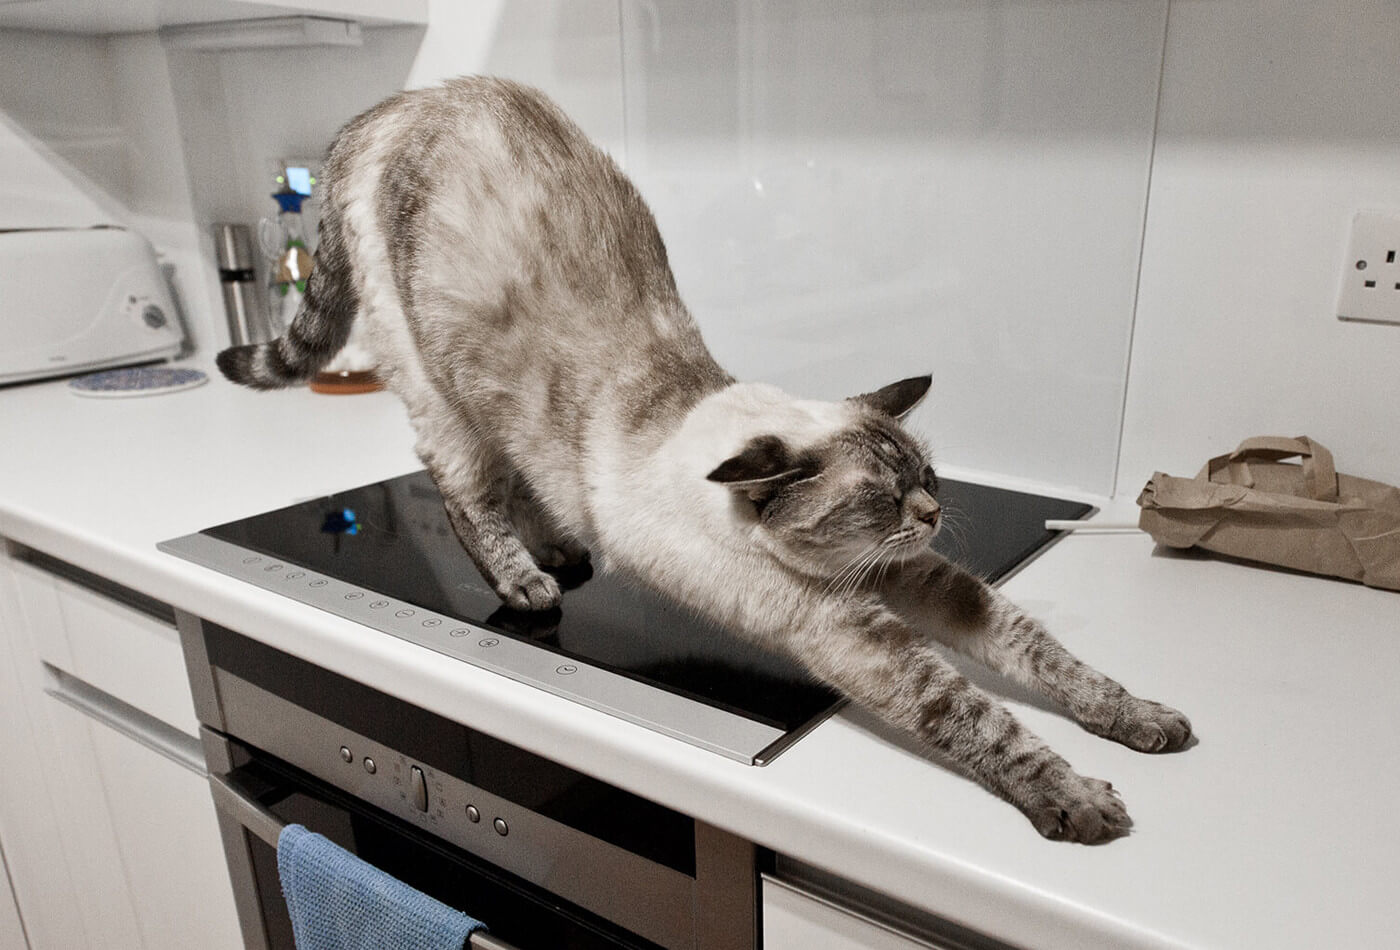 Is There A Thing Called Pet-Friendly Countertops?